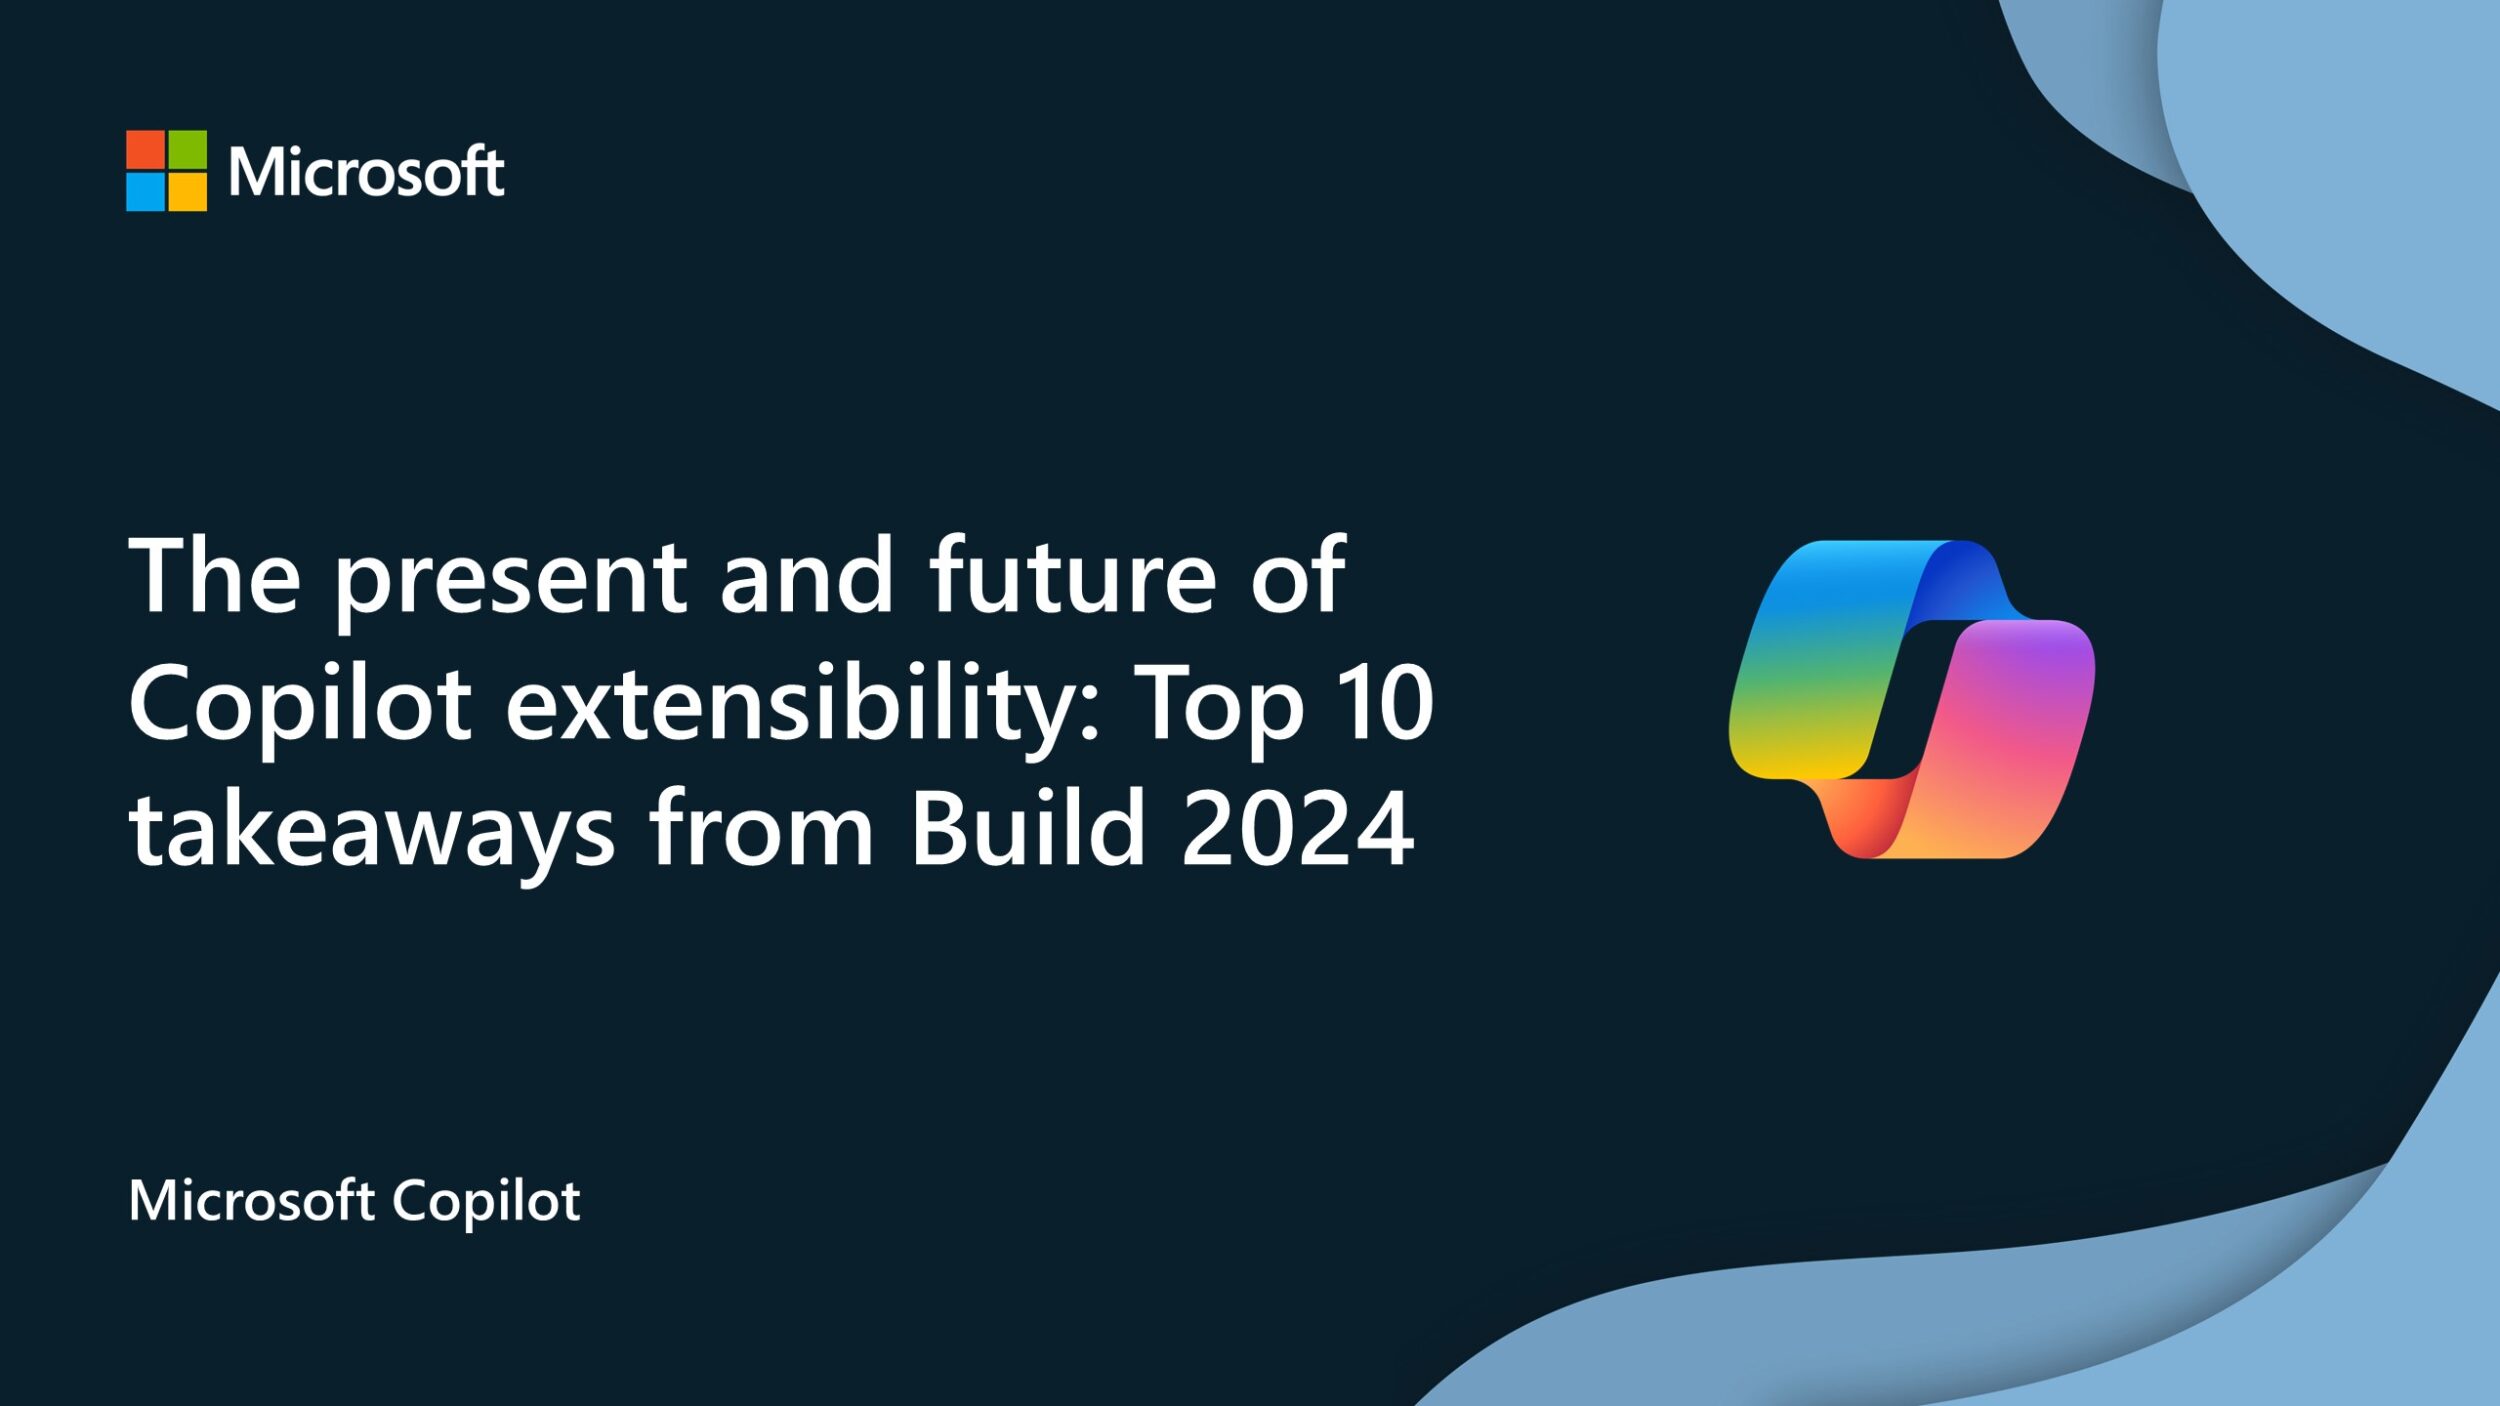 The present and future of Copilot extensibility: Top 10 takeaways from Build 2024